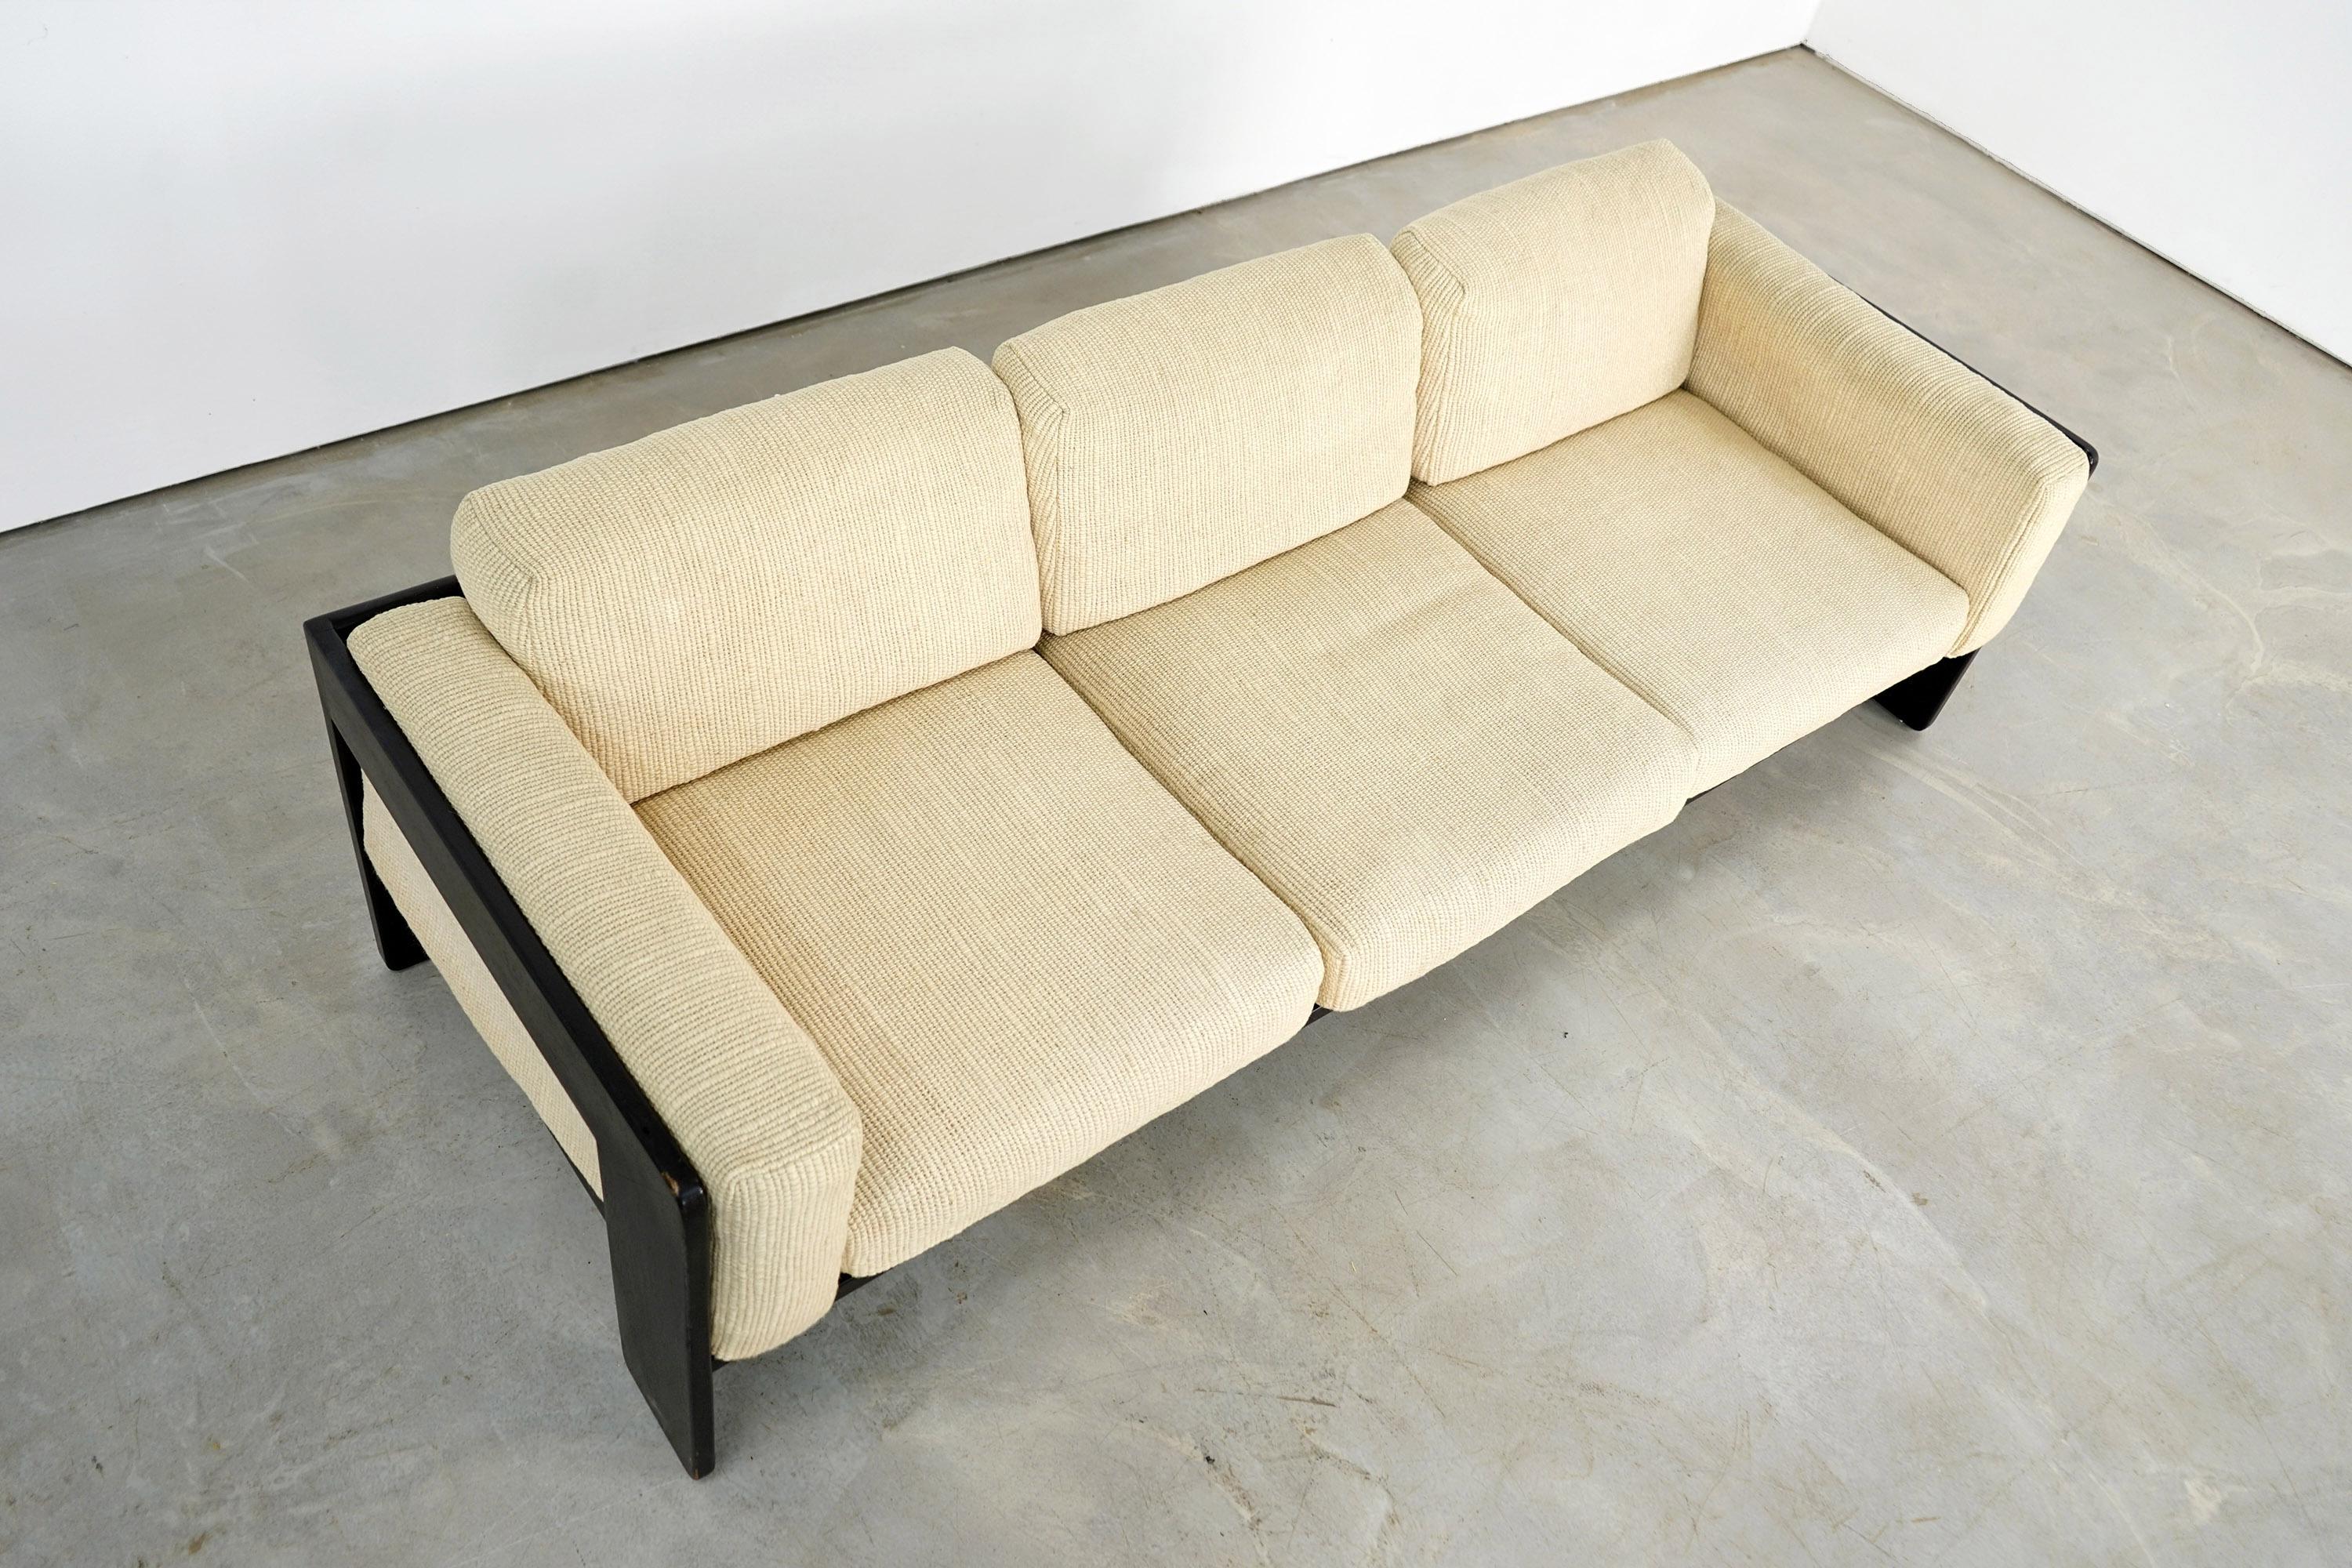 Central American Three-Seat Couch of the Bastiano Series, Afra & Tobia Scarpa for Knoll Int.